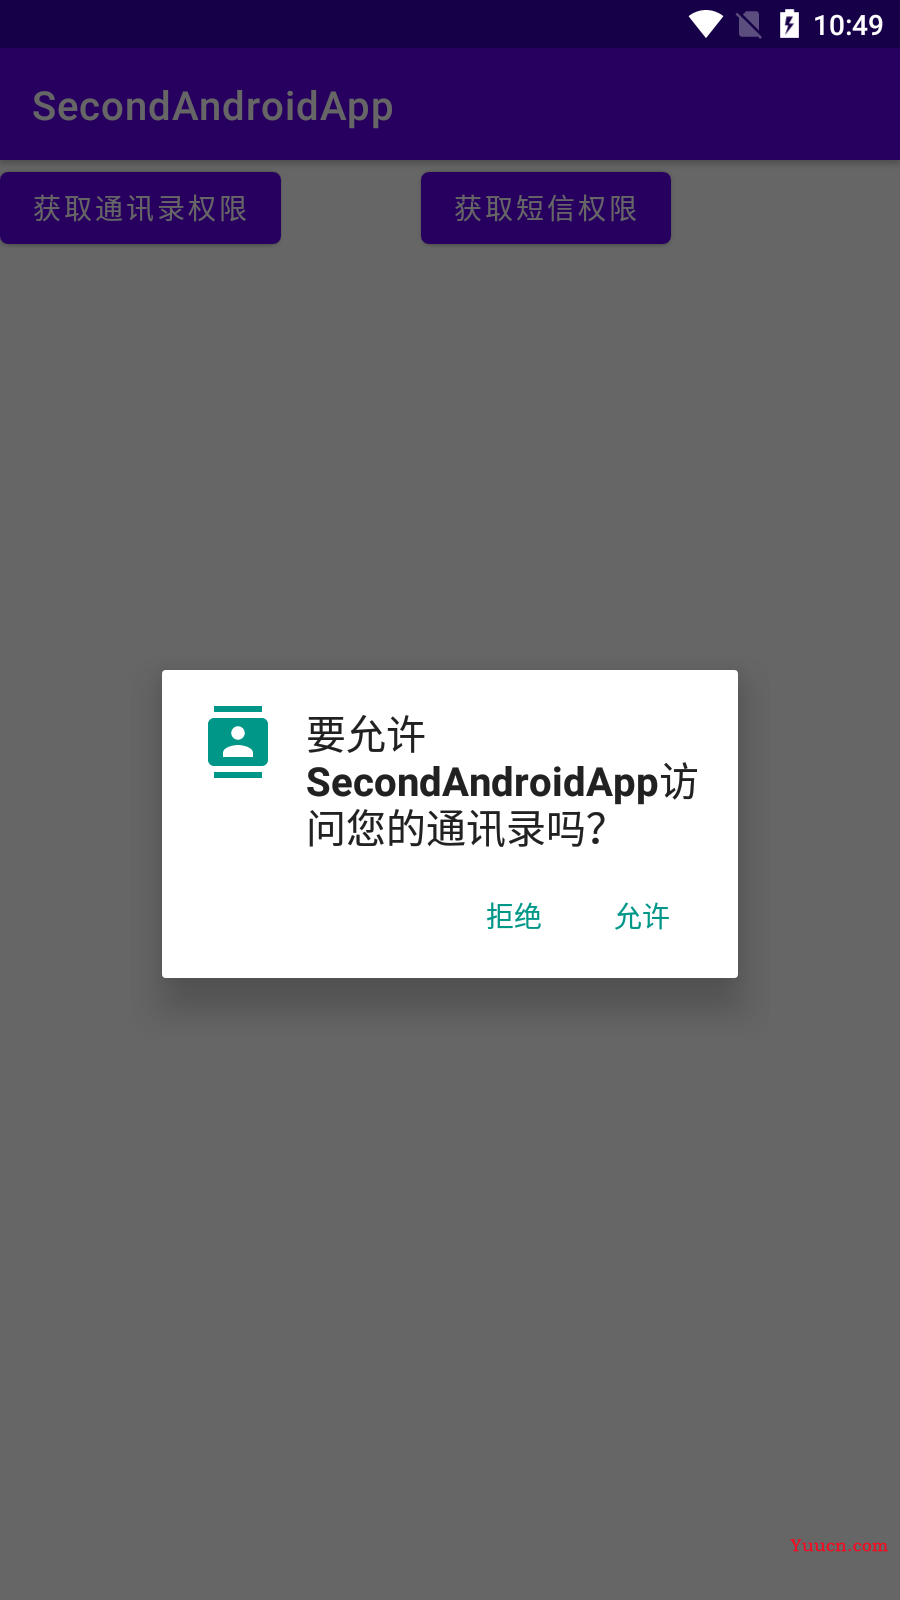 Android基础教程——从入门到精通（上）